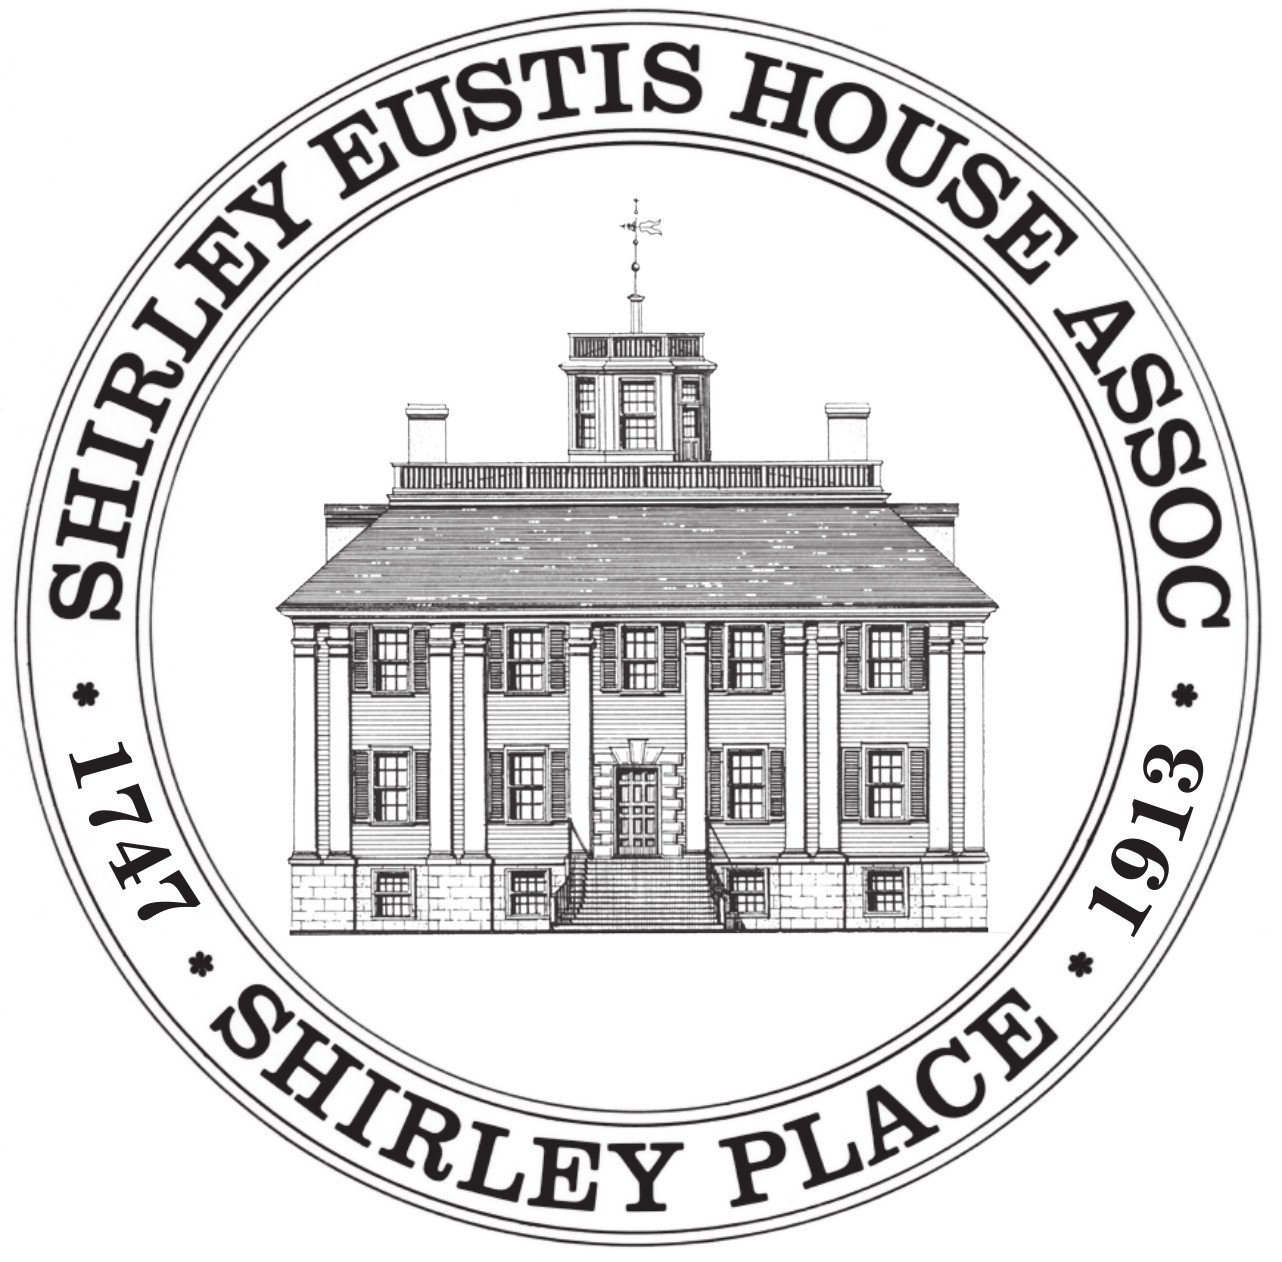 The Shirley-Eustis House